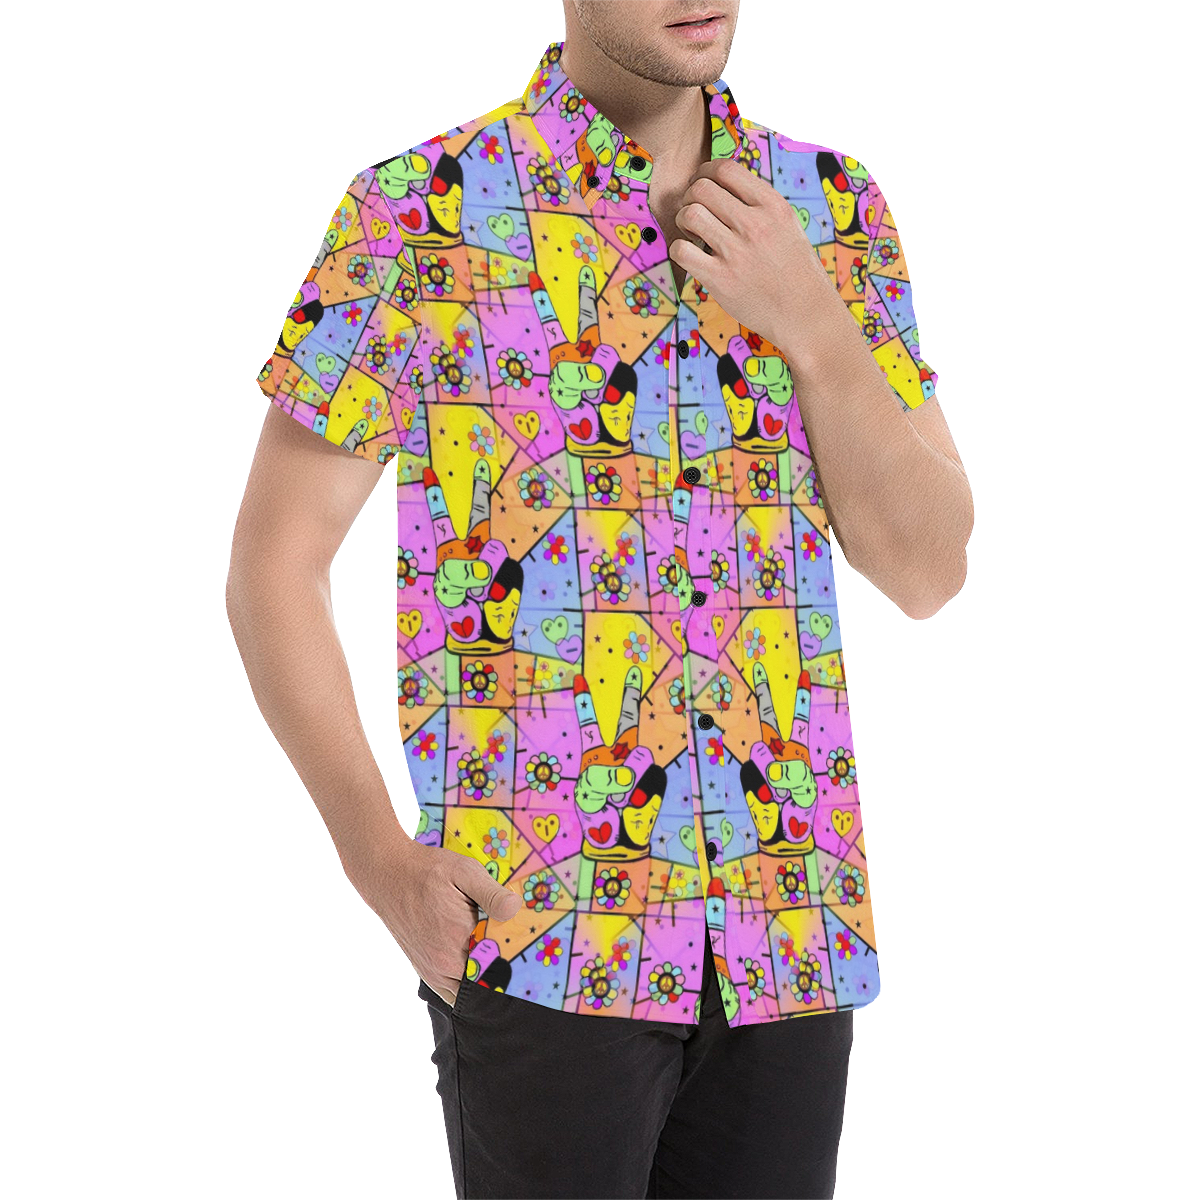 Peace Popart by Nico Bielow Men's All Over Print Short Sleeve Shirt (Model T53)